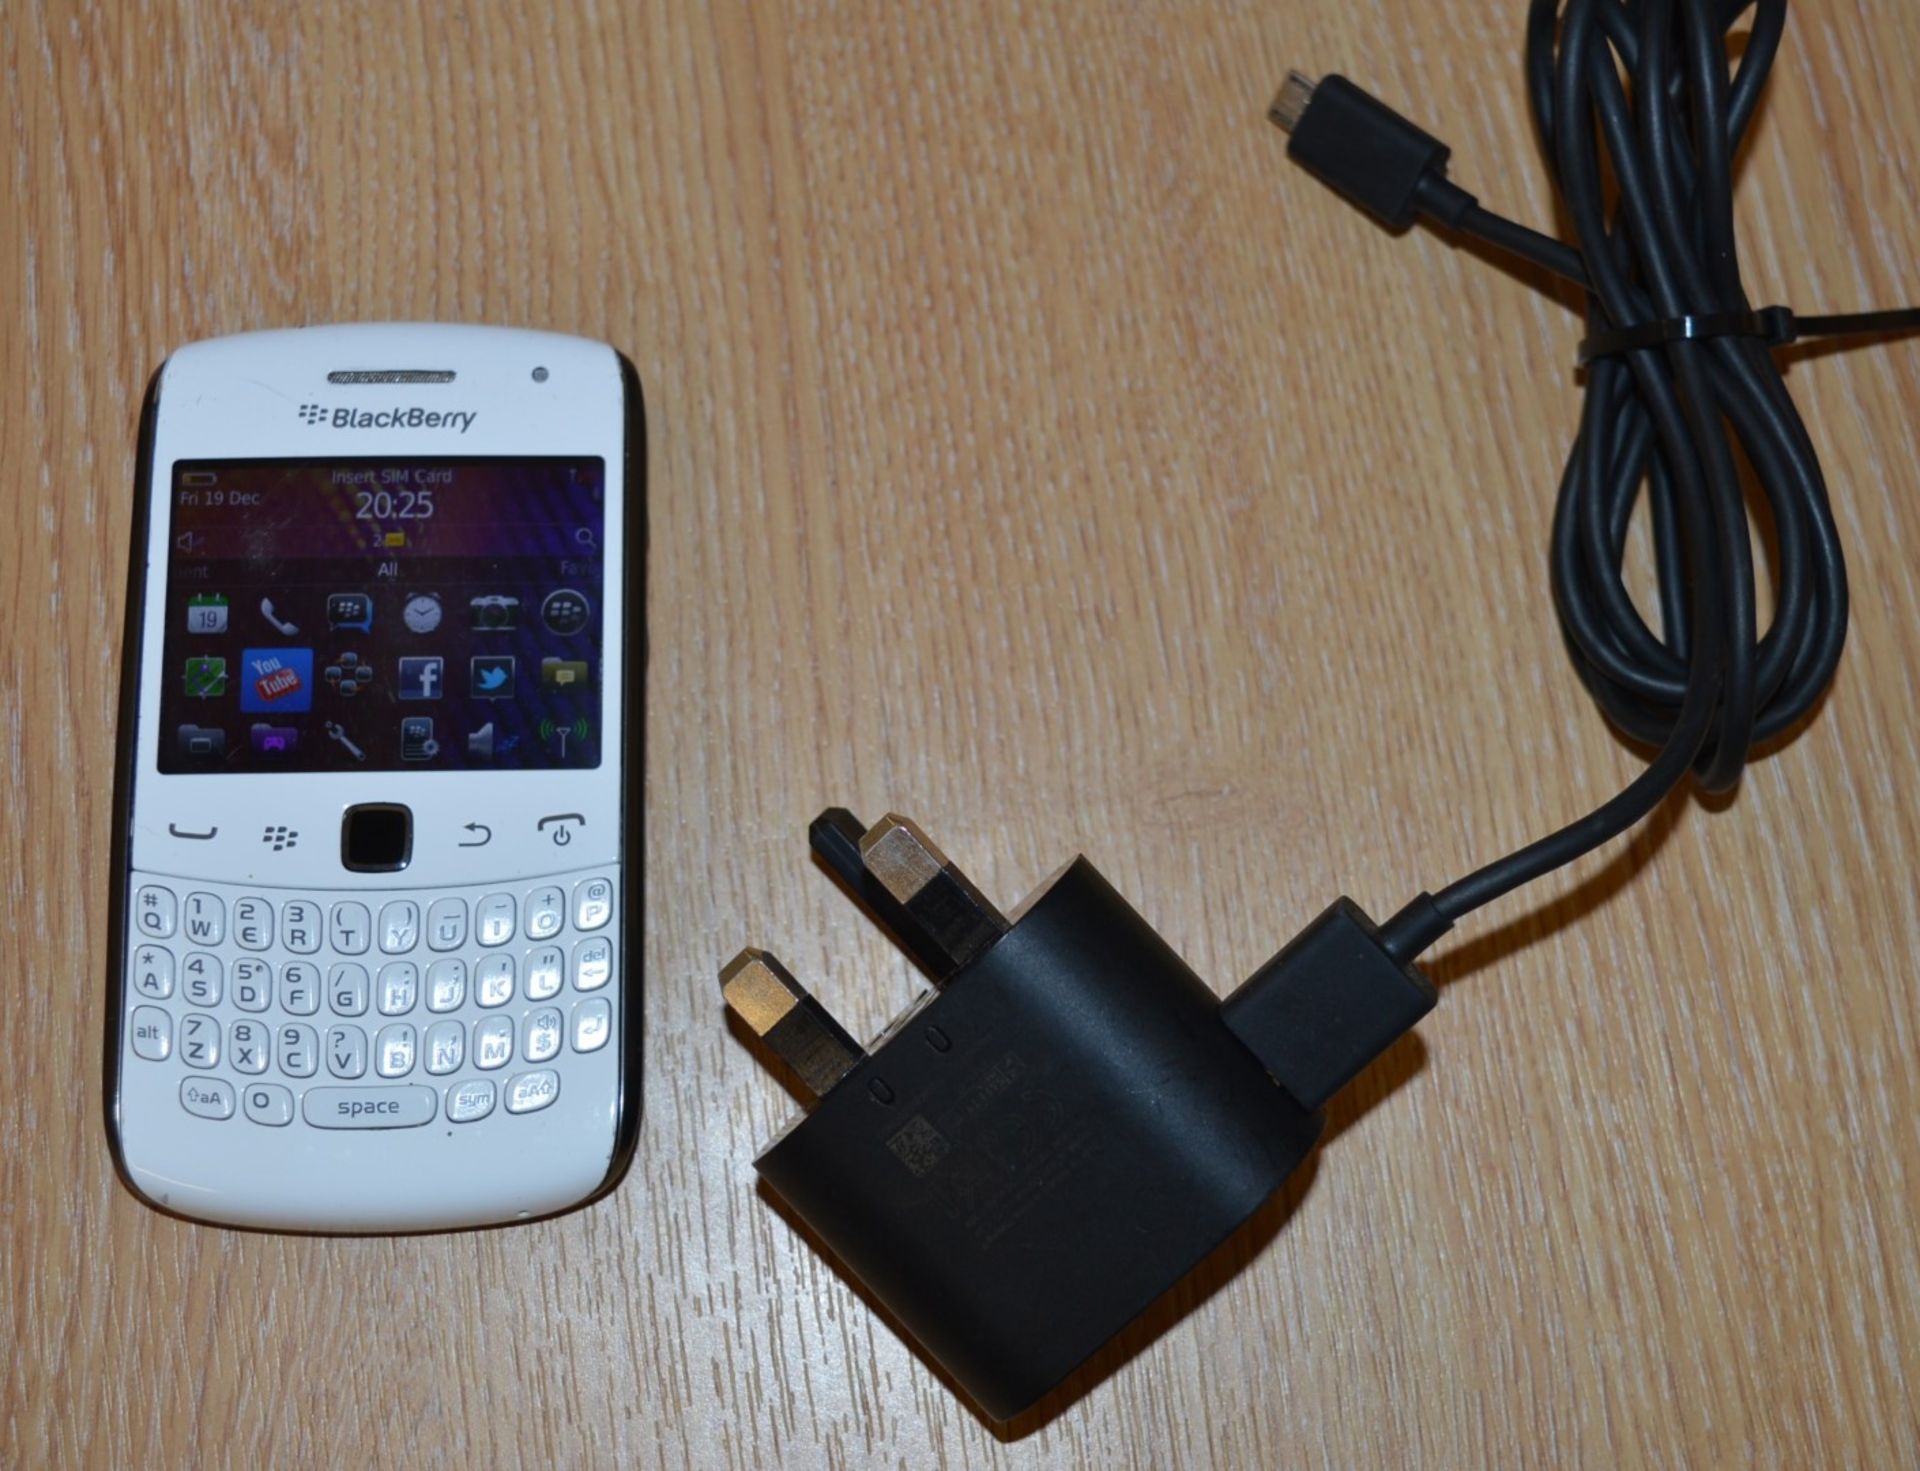 1 x Blackberry Curve 9360 Mobile Phone Handset With Charger - CL300 - Good Condition as Pictured -